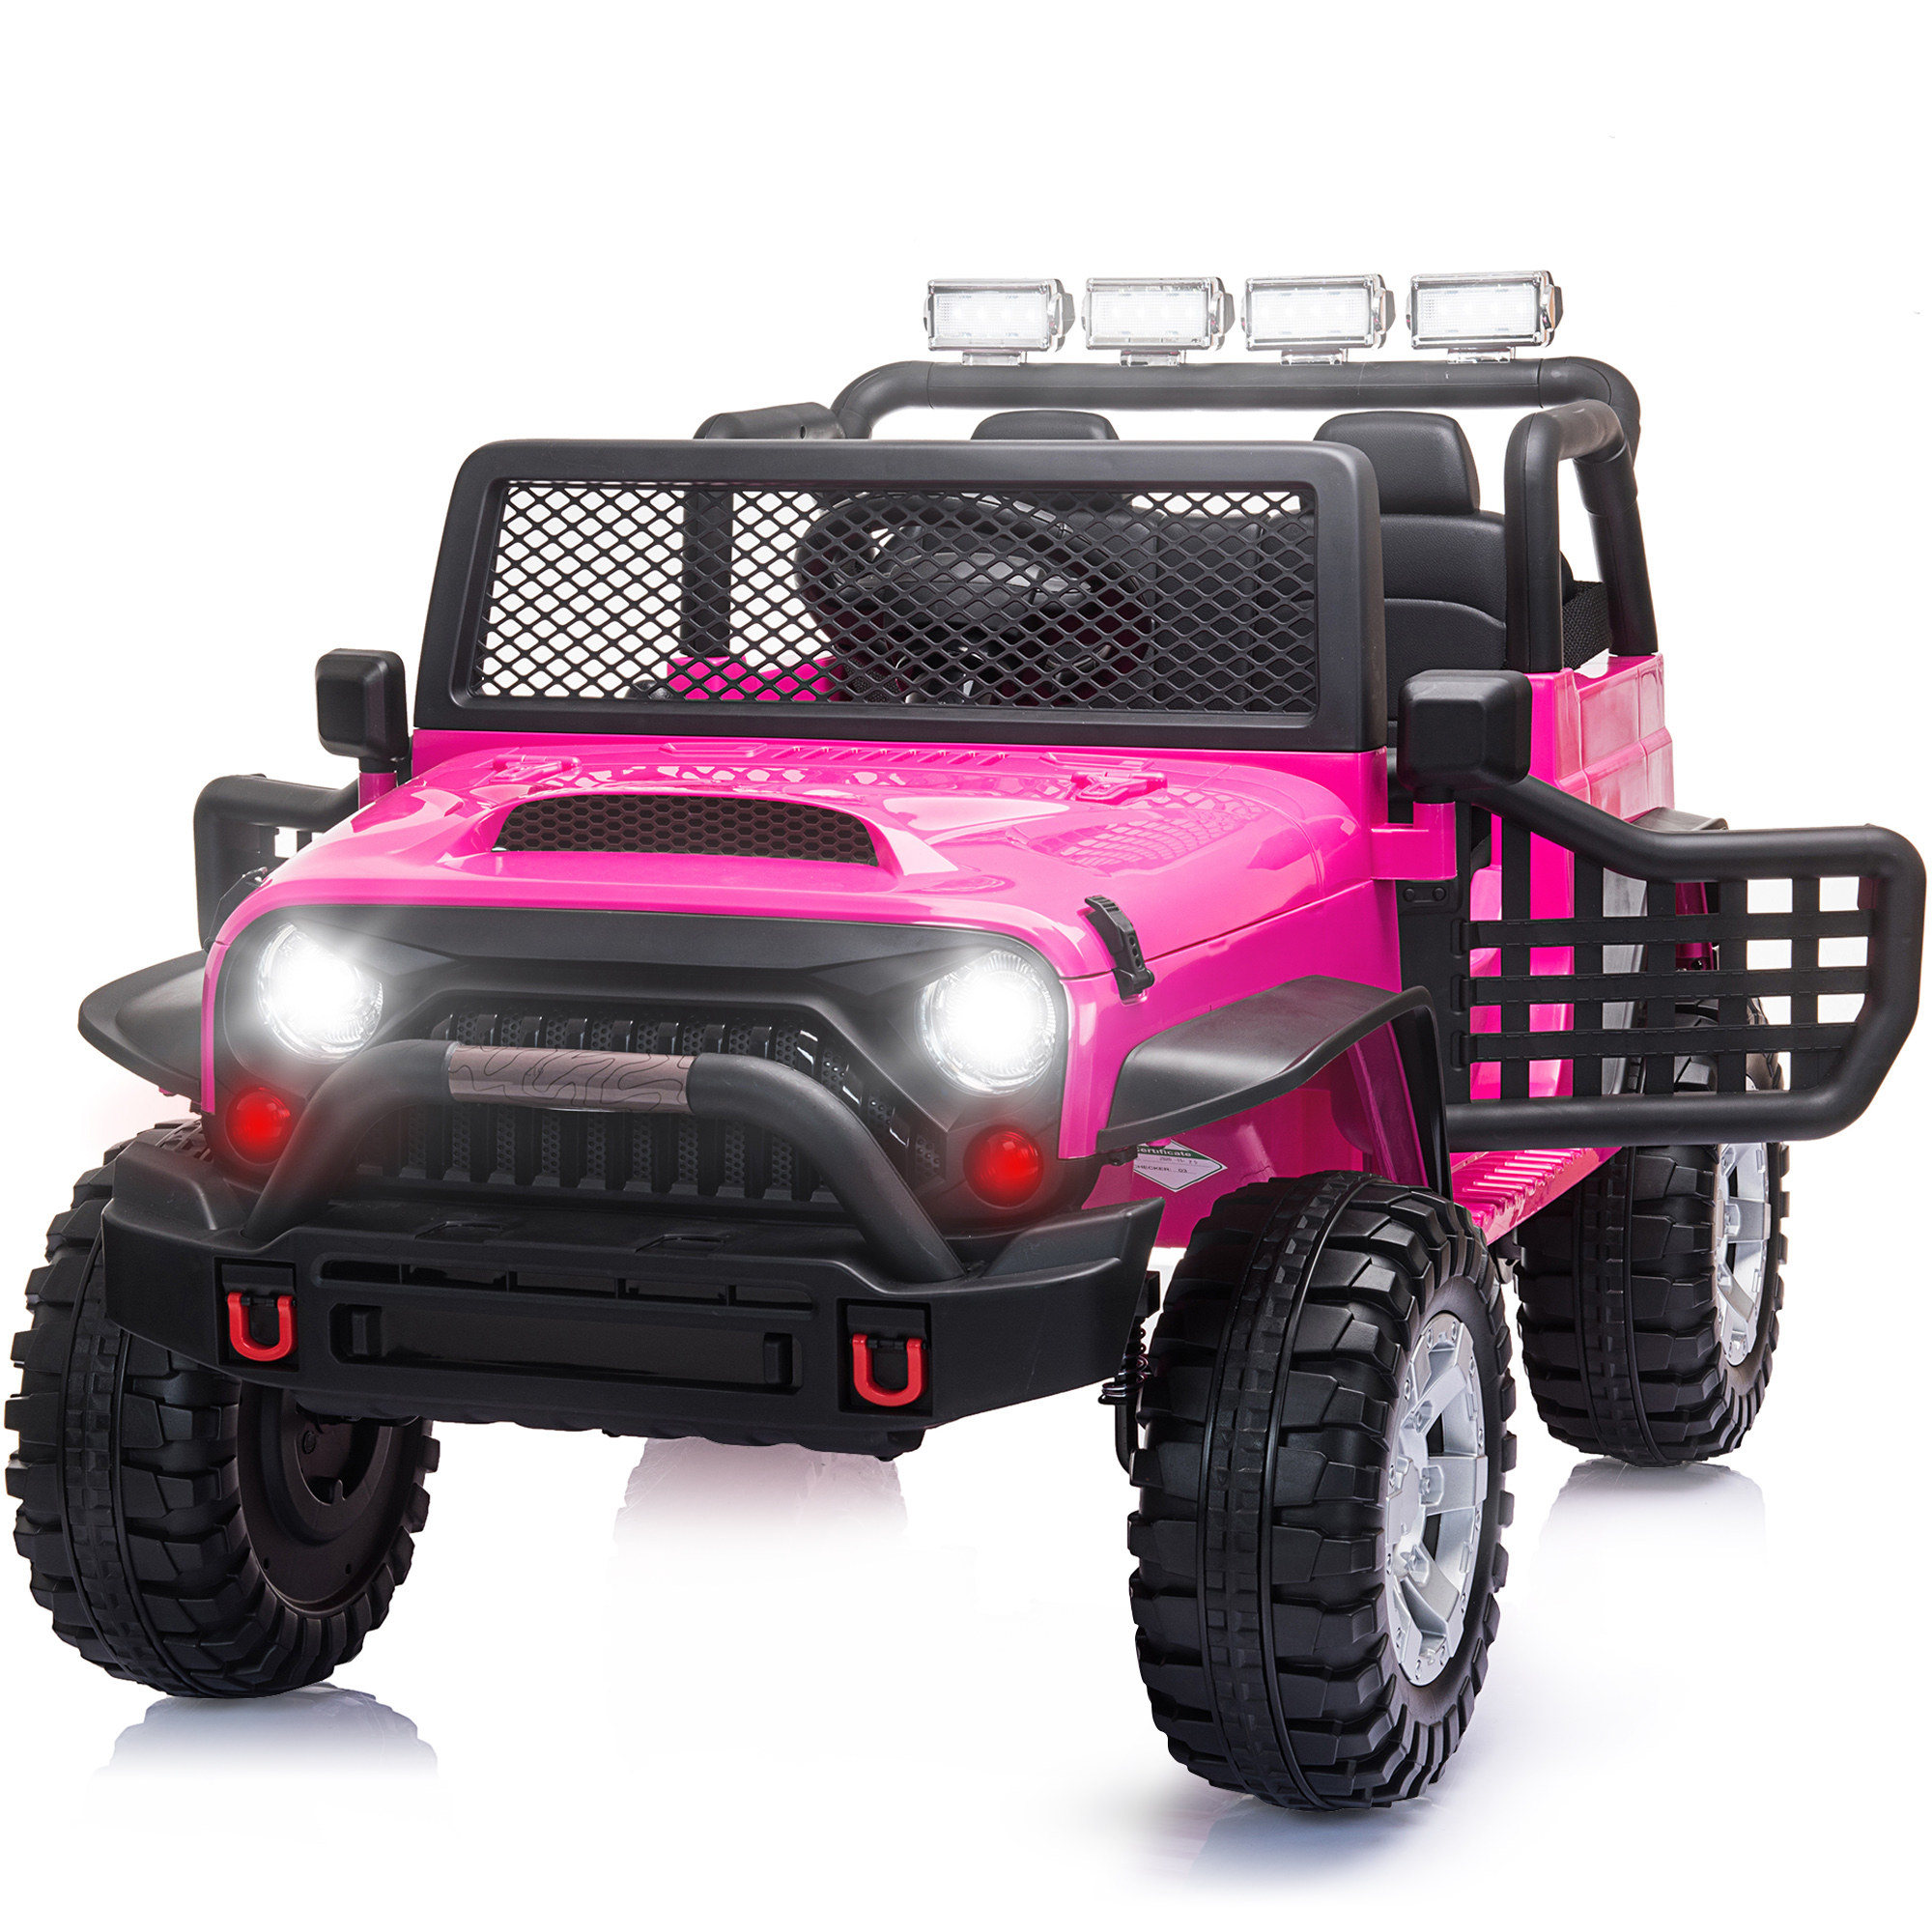 2 Seater Kids Ride on Truck with Remote Control, Music, 12V Children Electric Jeep Car - image 1 of 10